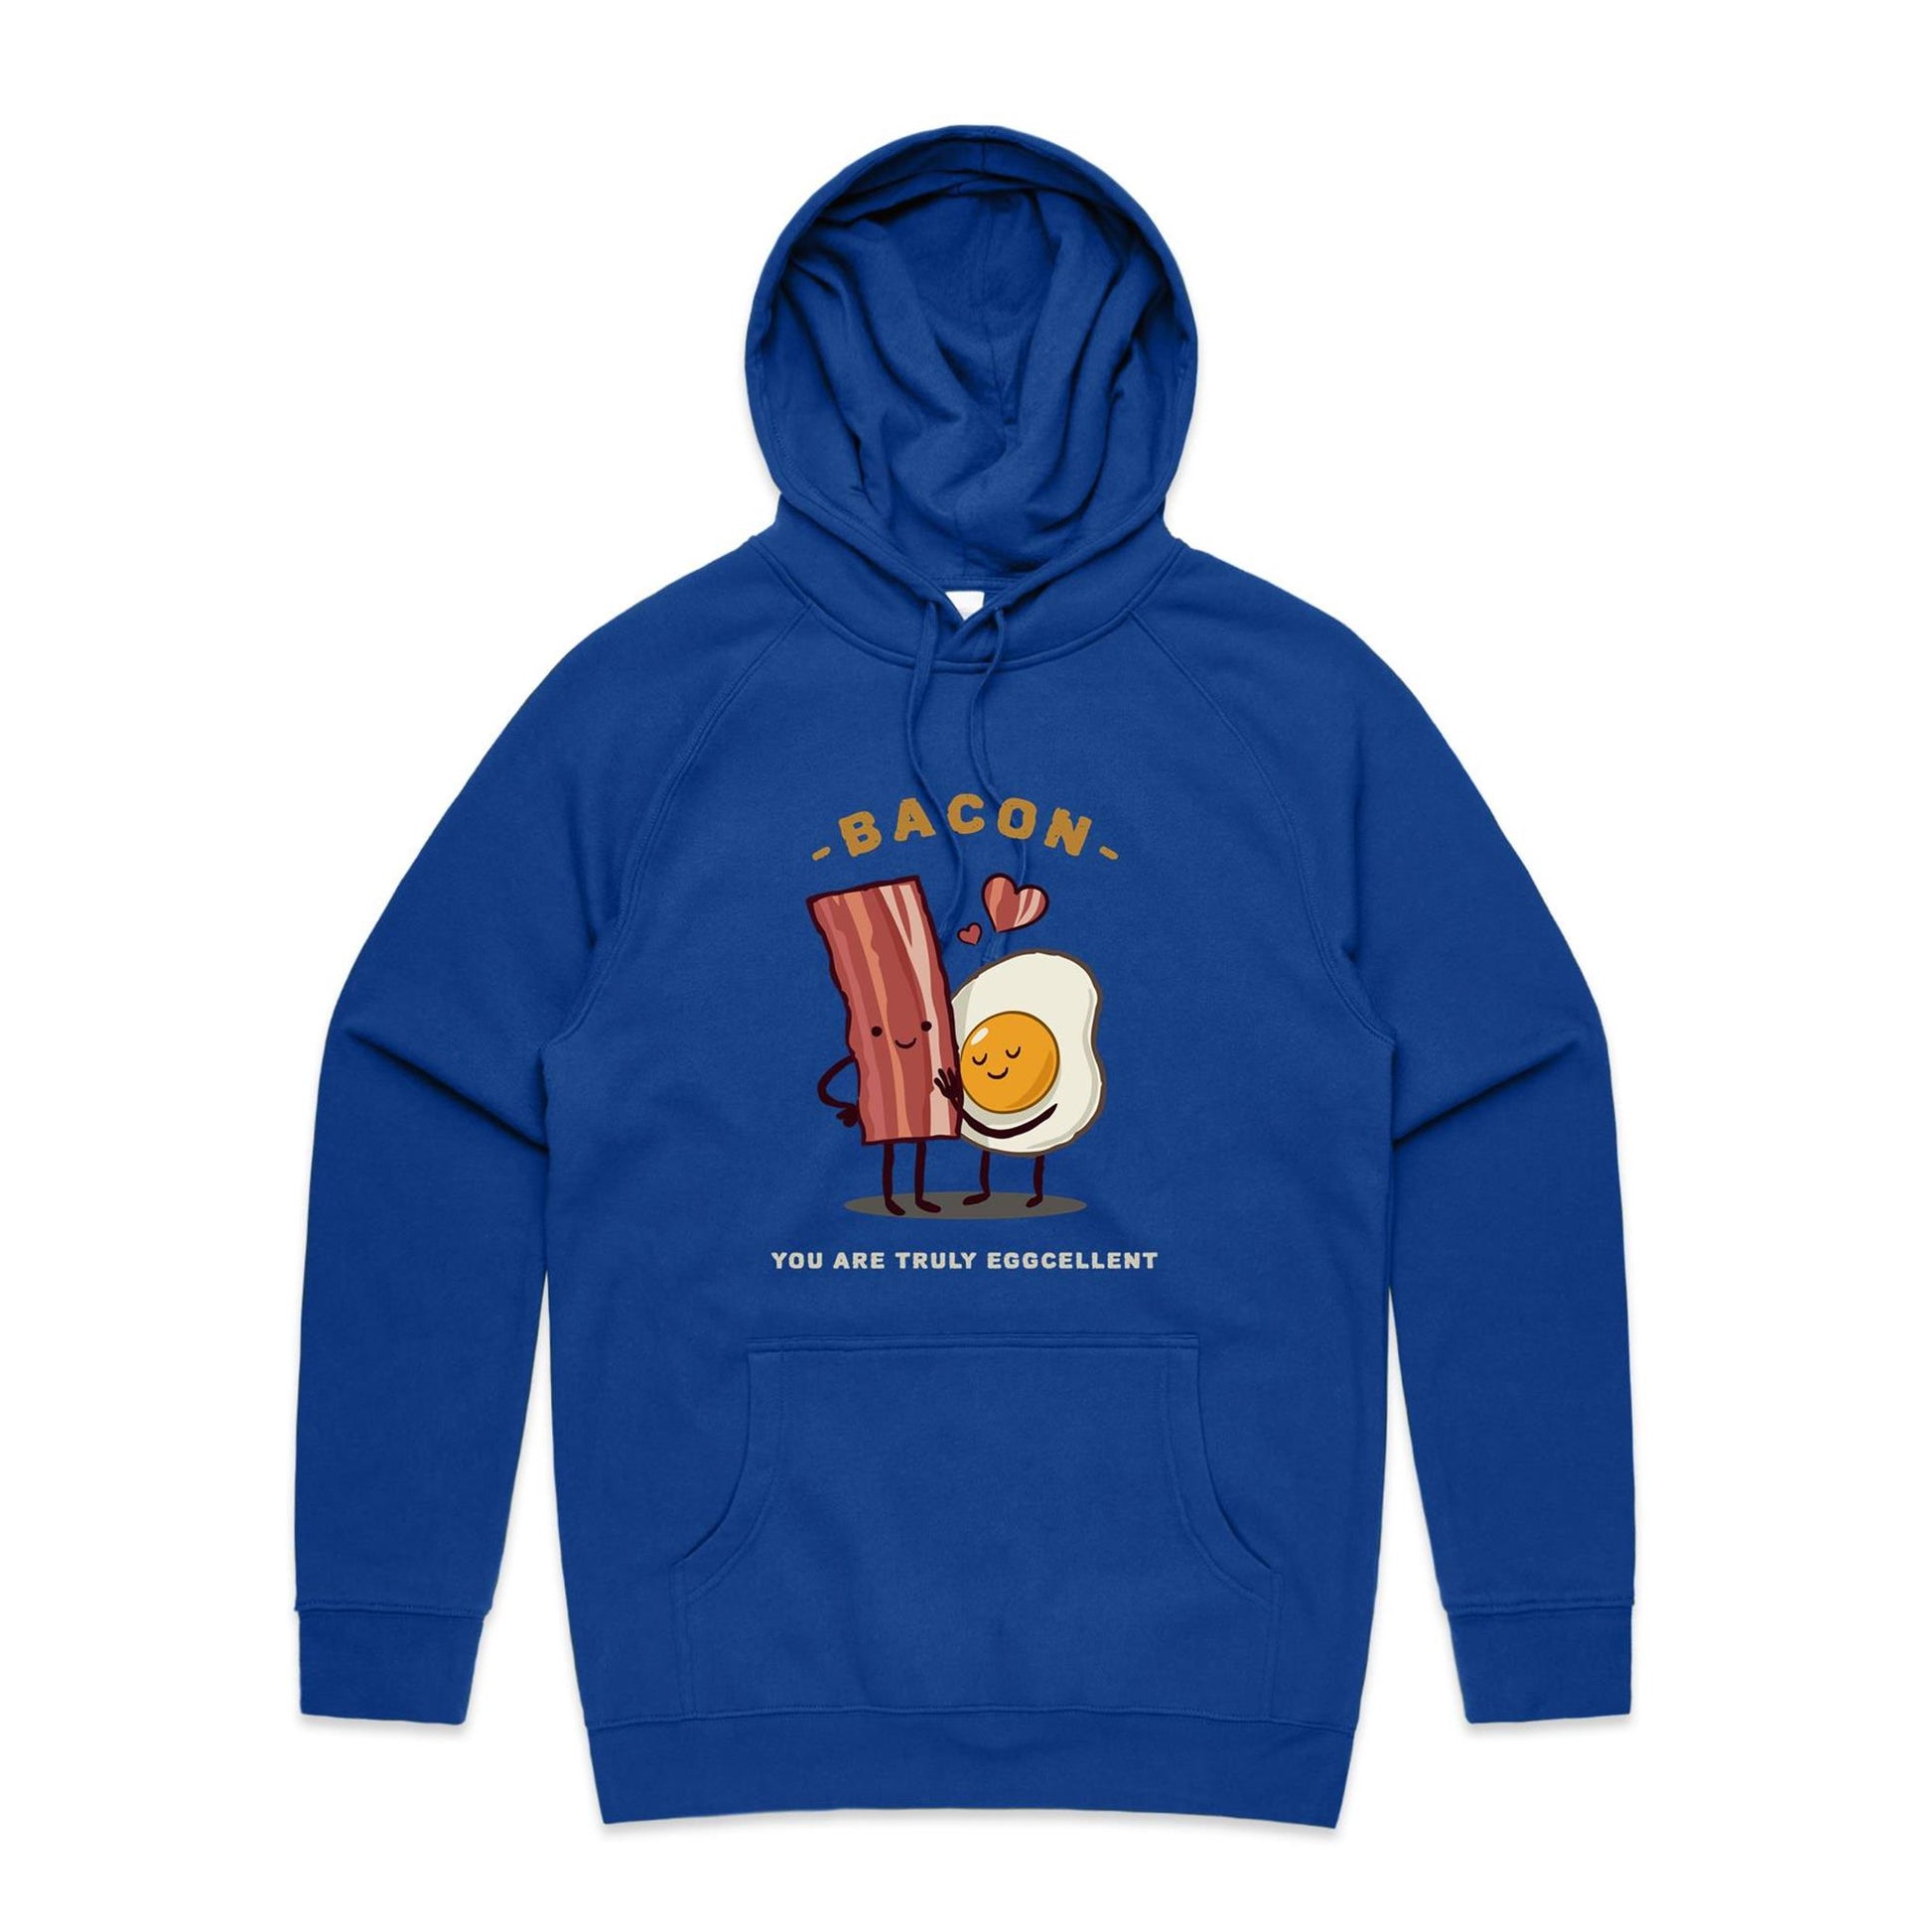 Bacon, You Are Truly Eggcellent - Supply Hood Bright Royal Mens Supply Hoodie Food